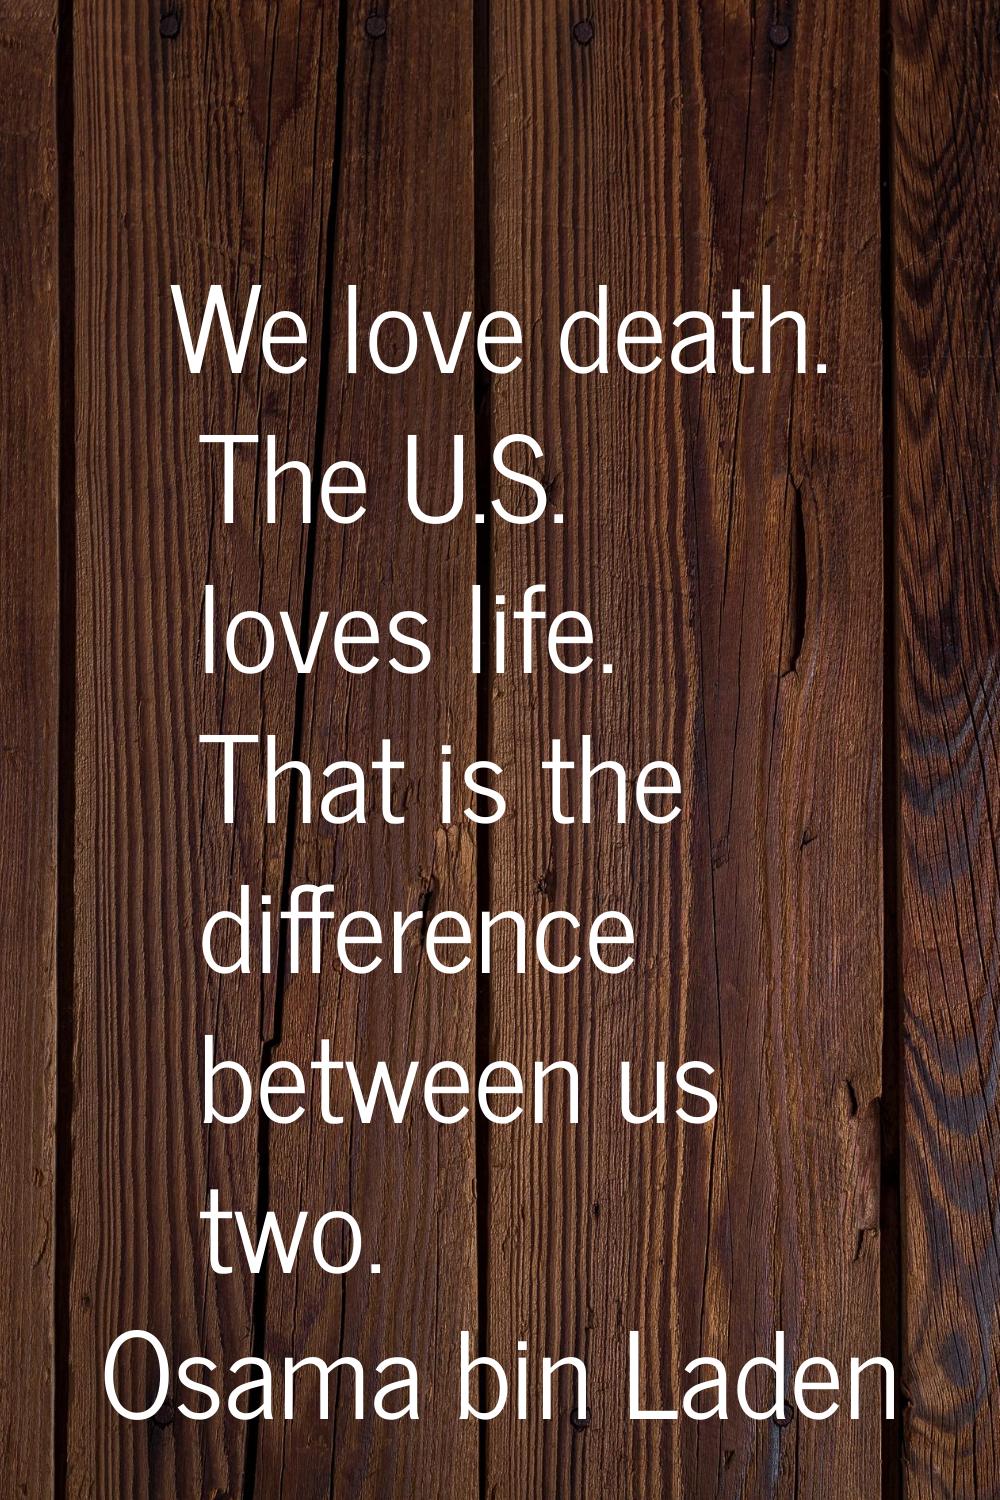 We love death. The U.S. loves life. That is the difference between us two.